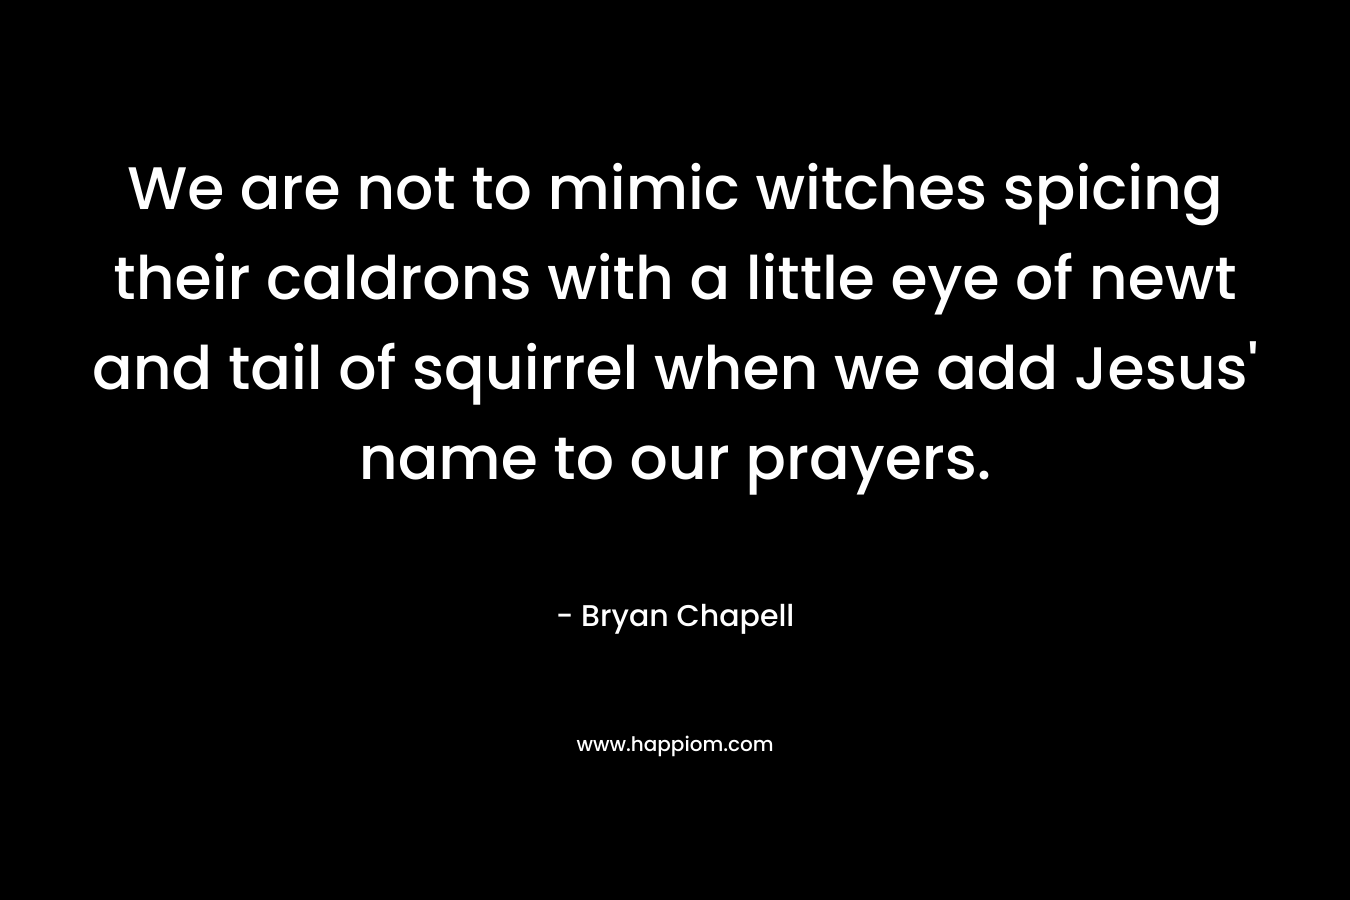 We are not to mimic witches spicing their caldrons with a little eye of newt and tail of squirrel when we add Jesus’ name to our prayers. – Bryan Chapell